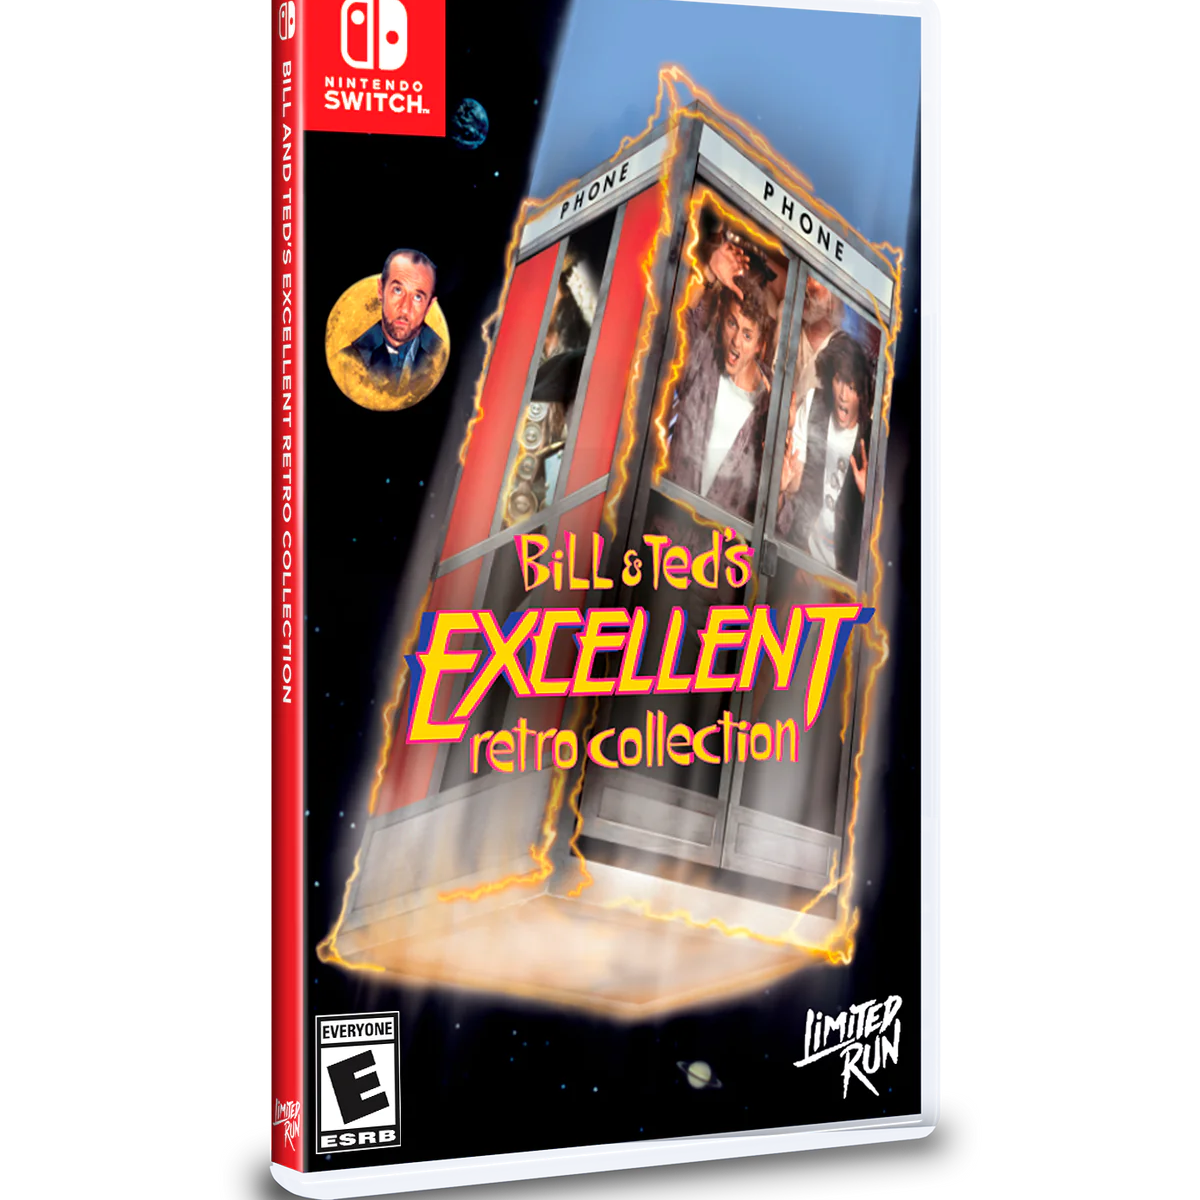 BILL AND TEDS EXCELLENT RETRO COLLECTION [LIMITED RUN GAMES #152] - SWITCH